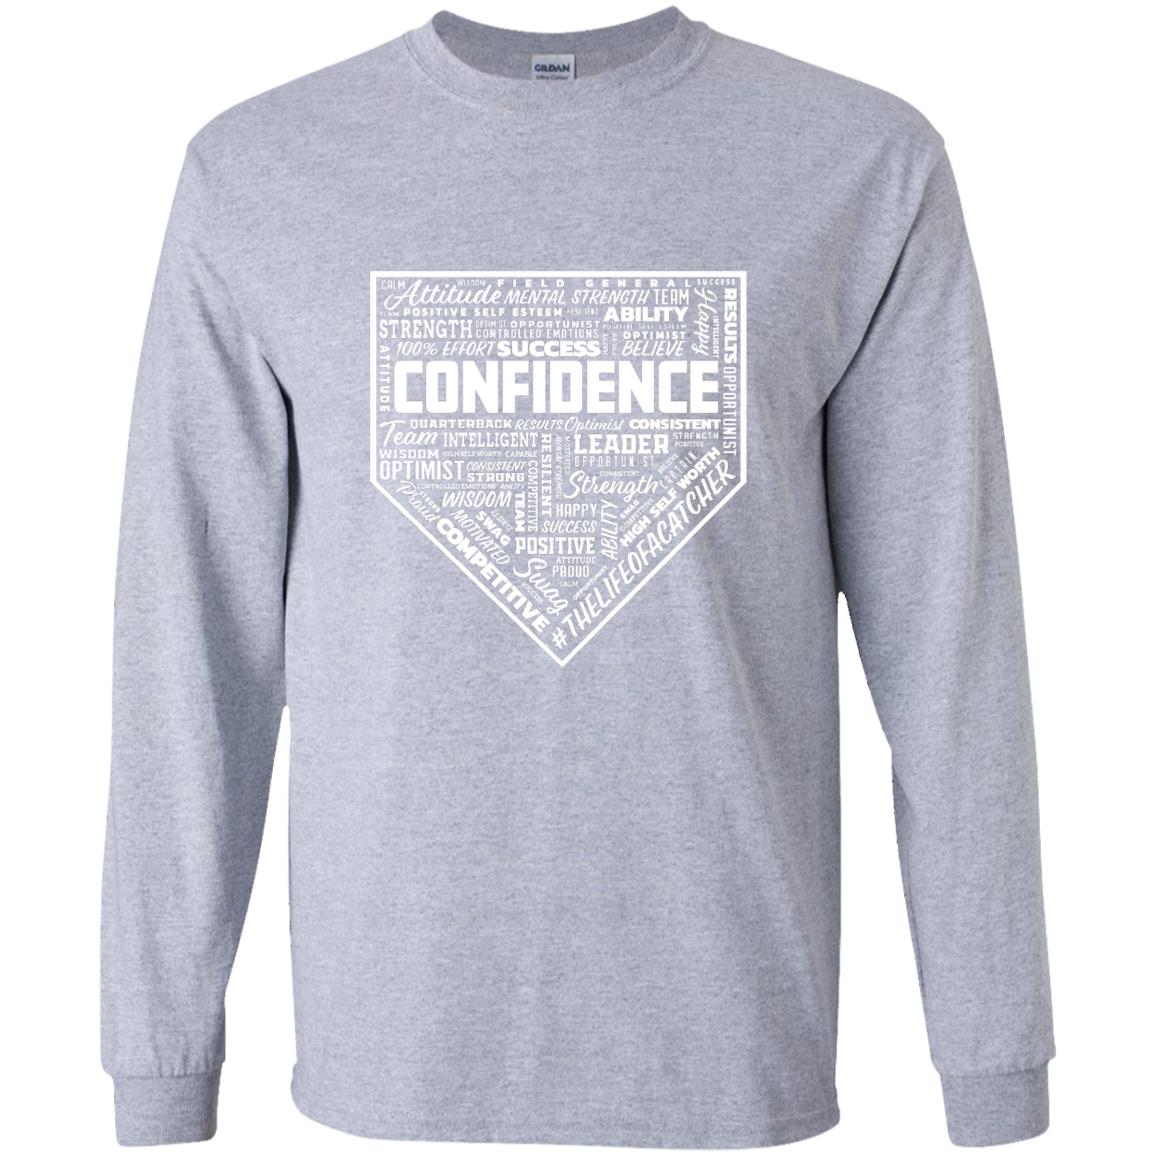 The Catching Guy Catcher Confidence Youth Long Sleeve Tee in grey